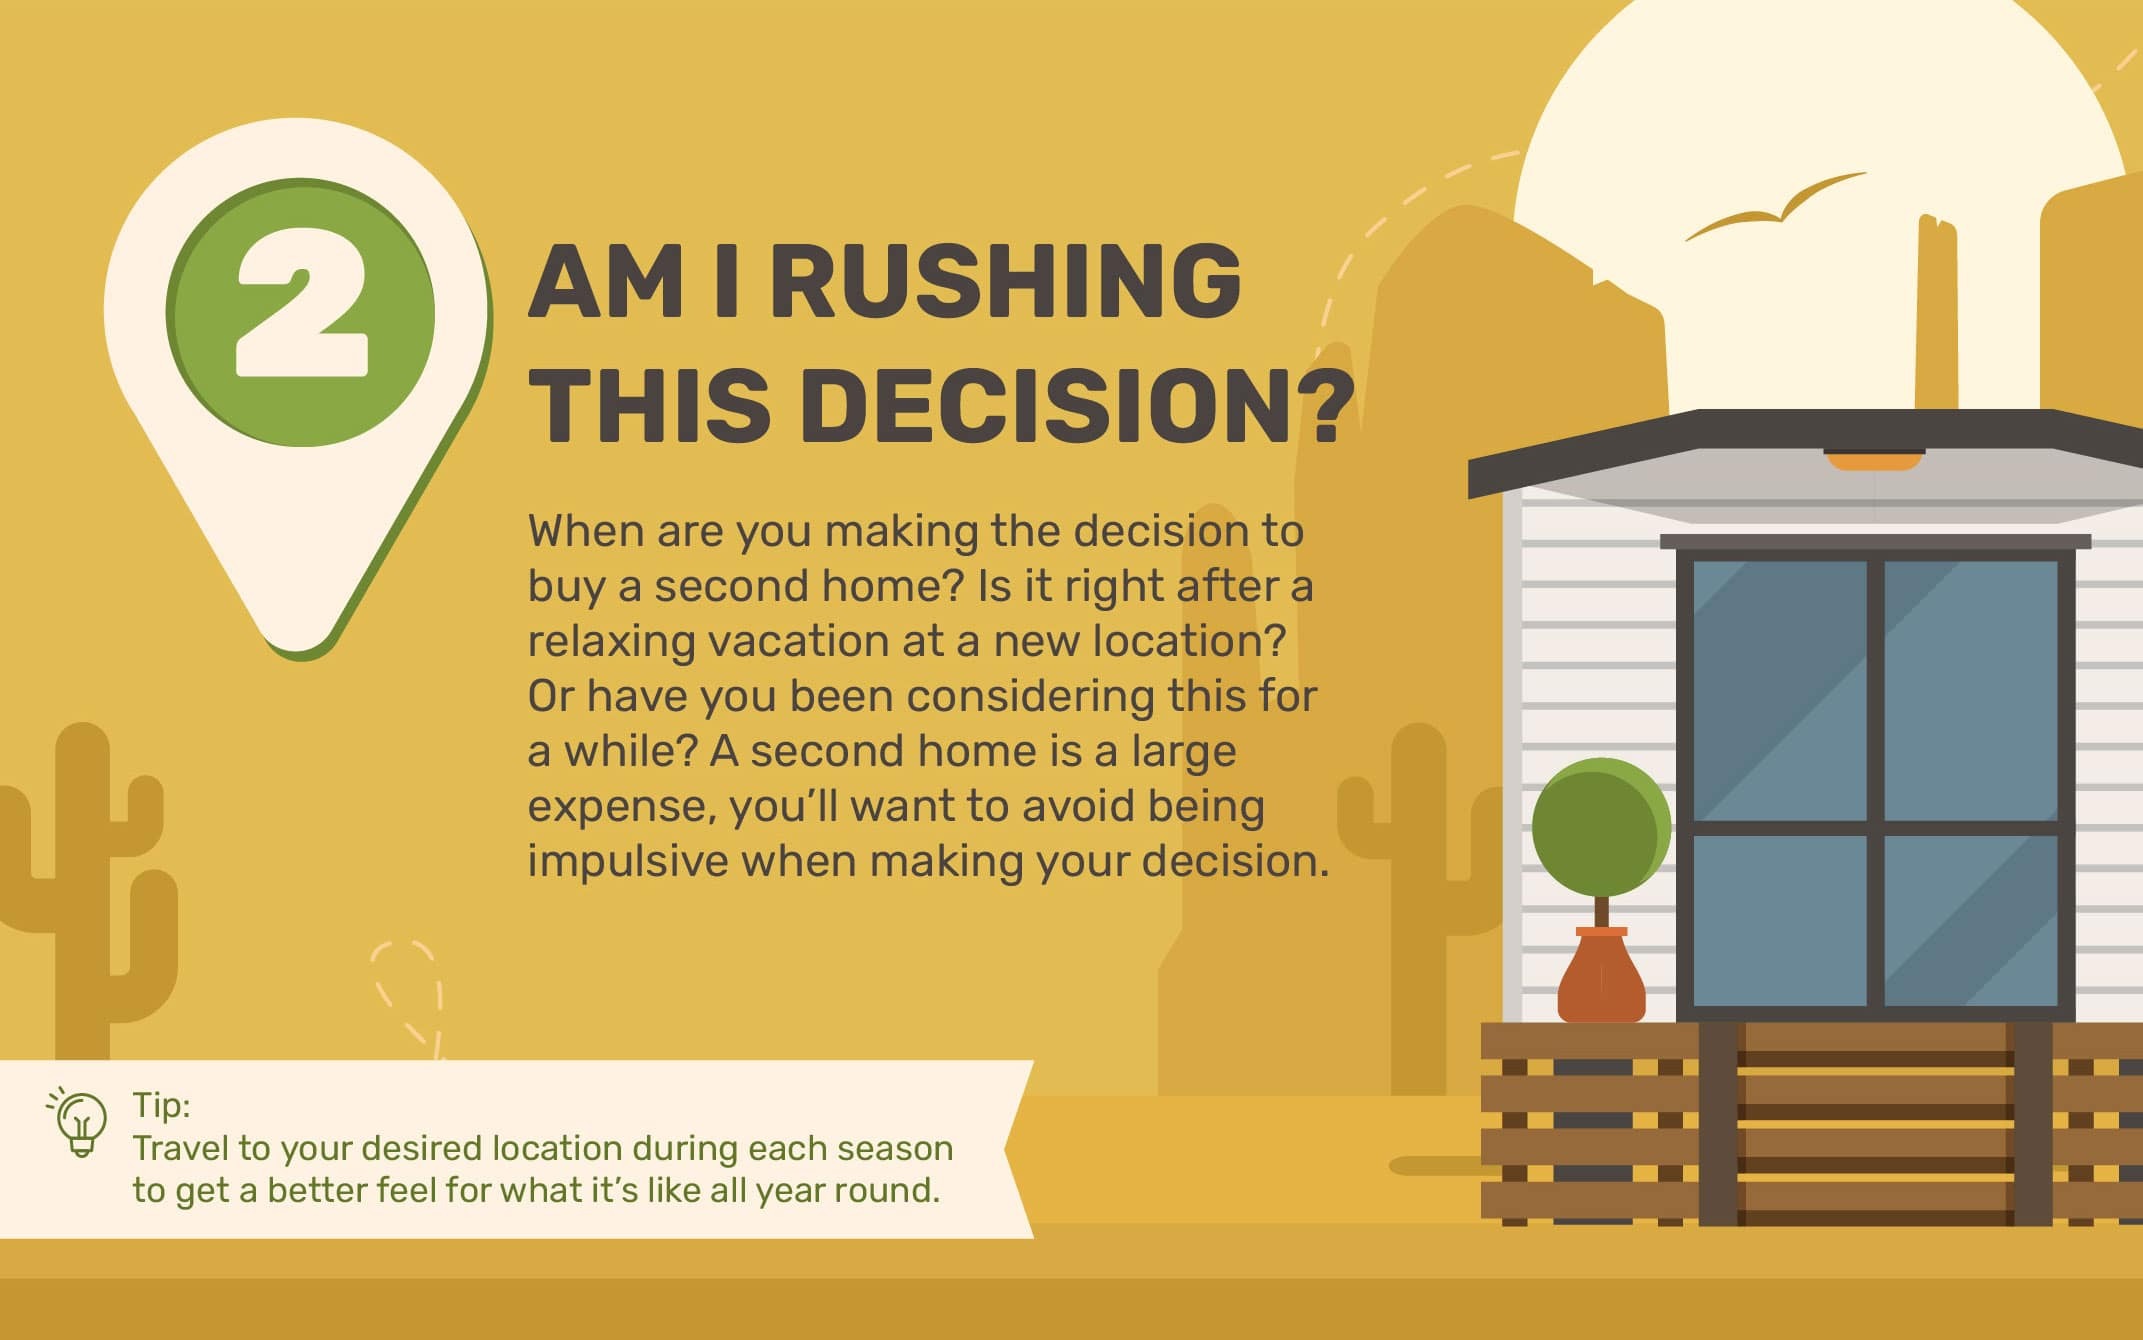 2. Am I Rushing This Decision? When are you making the decision to buy a second home? Is it right after a relaxing vacation at a new location? Or have you been considering this for awhile? A second home is a large expense, you’ll want to avoid being impulsive when making your decision. Tip: Travel to your desired location during each season to get a better feel for what it’s like all year round.